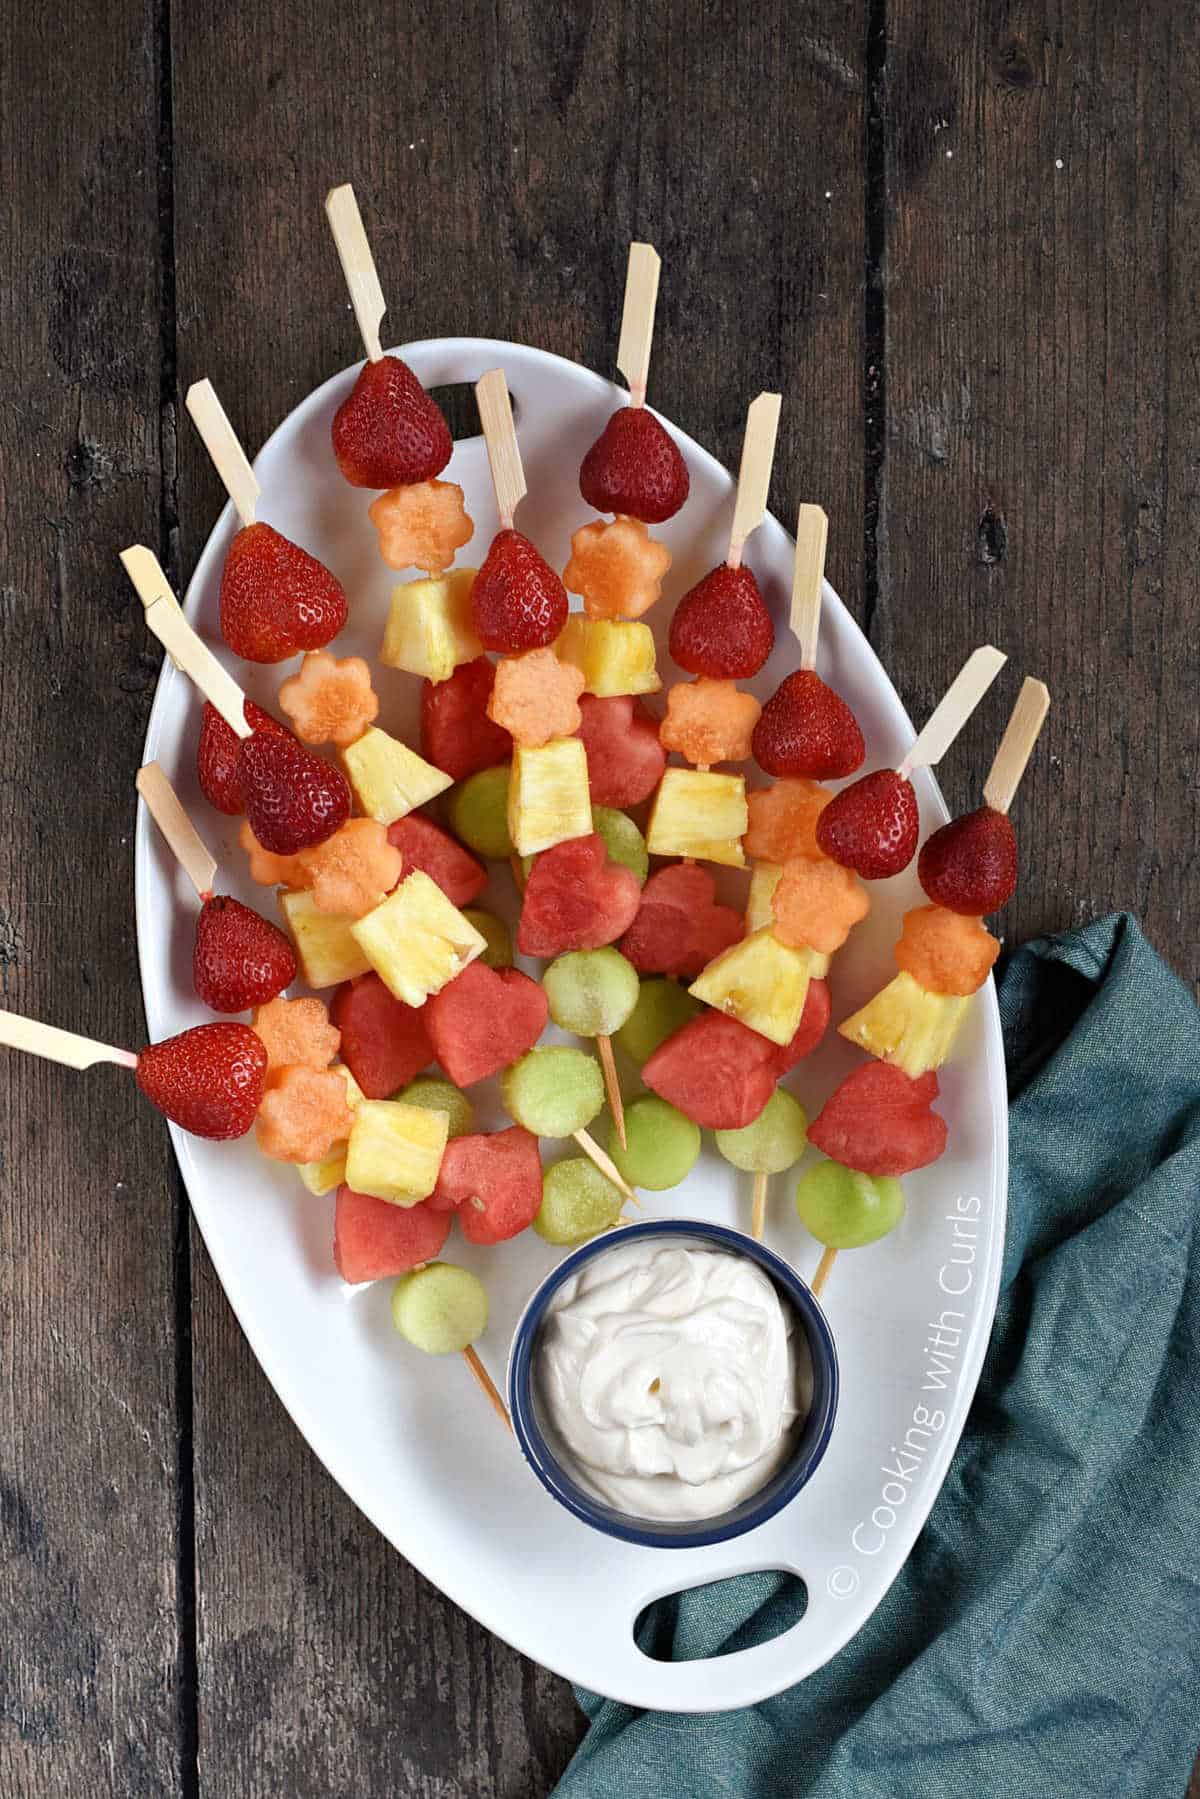 Fresh fruits threaded onto wood skewers, stacked on an oval platter with a bowl of yogurt dip at the bottom.